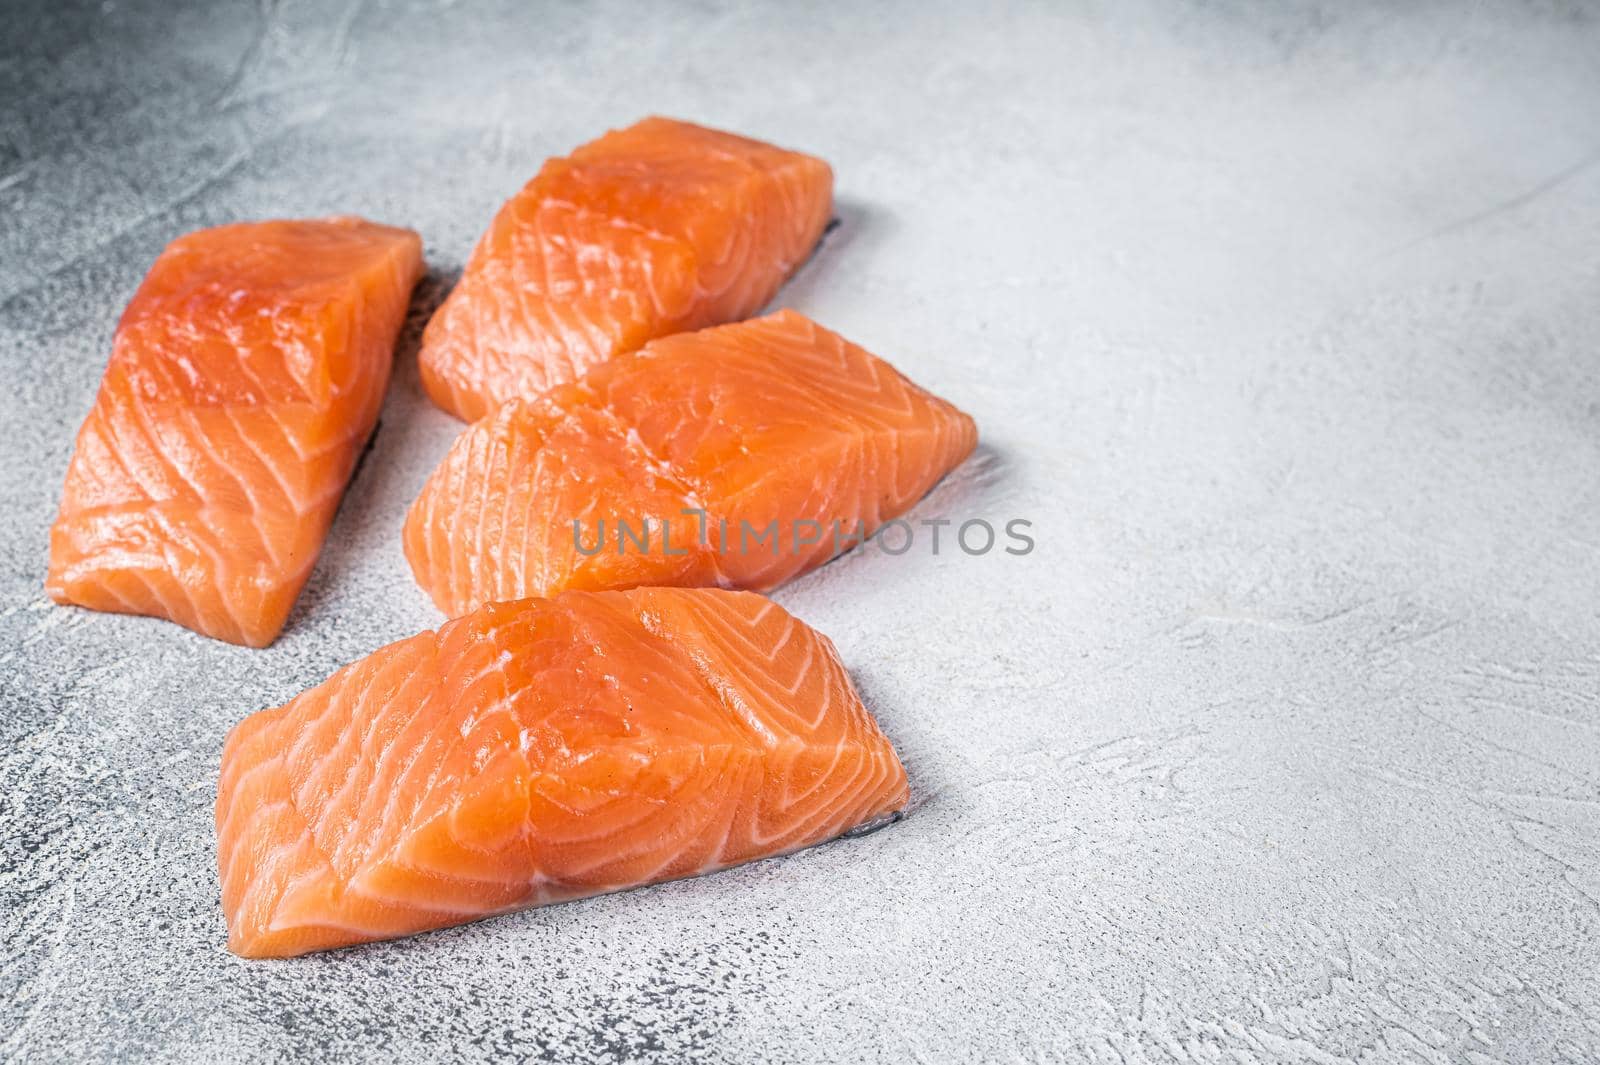 Raw salmon fillet steak on kitchen table. White background. Top view. Copy space by Composter